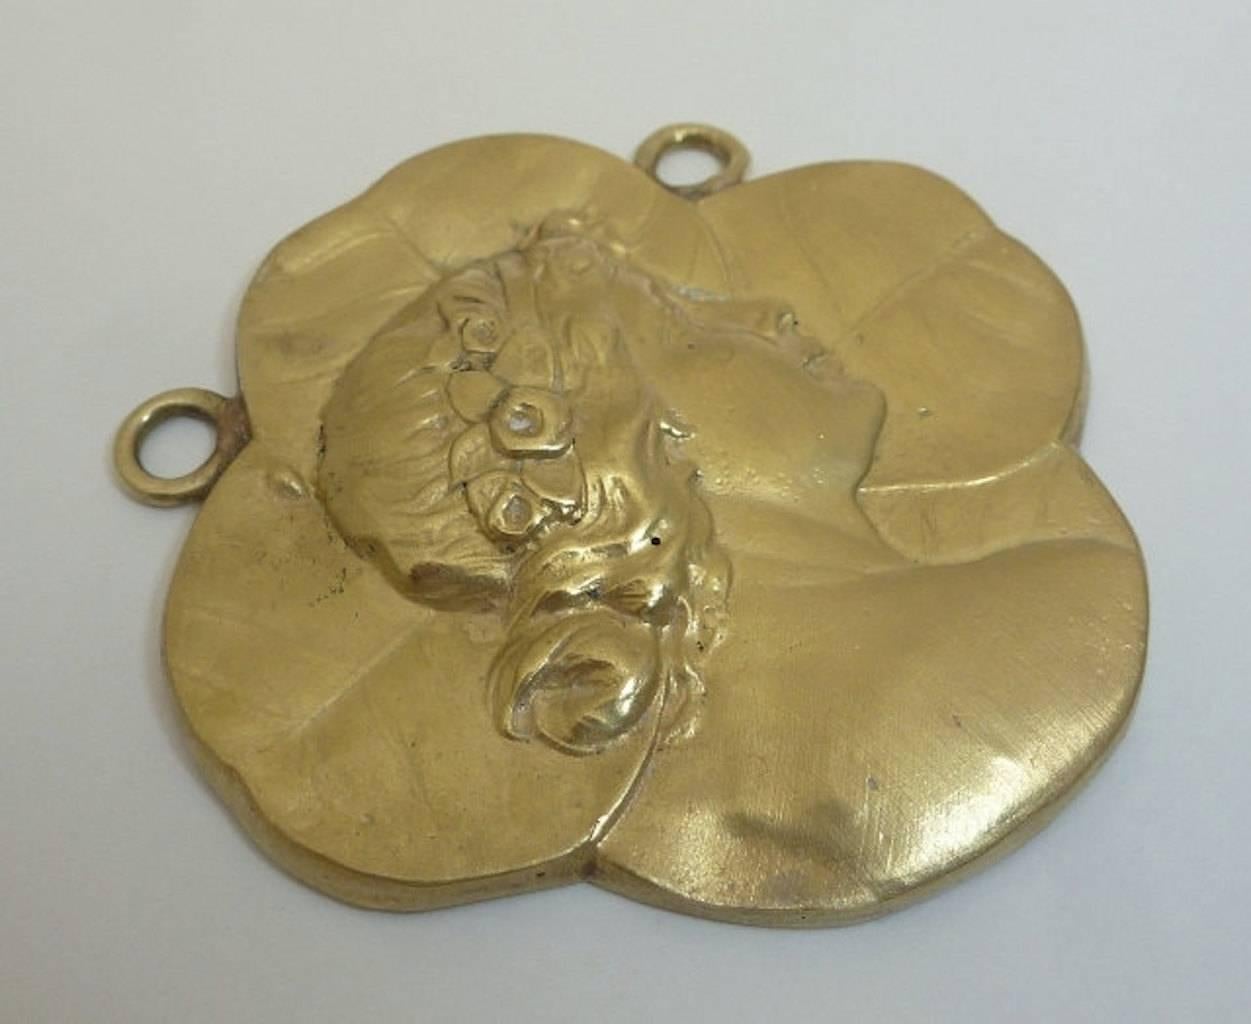 Beacon Hill Jewelers Presents:

An art nouveau Figural pendant in luxurious 18 karat yellow gold by the famed Marcus & Company. Weighing a substantial 26 grams and measuring nearly 2 inches in diameter, this pendant is a true rarity due to